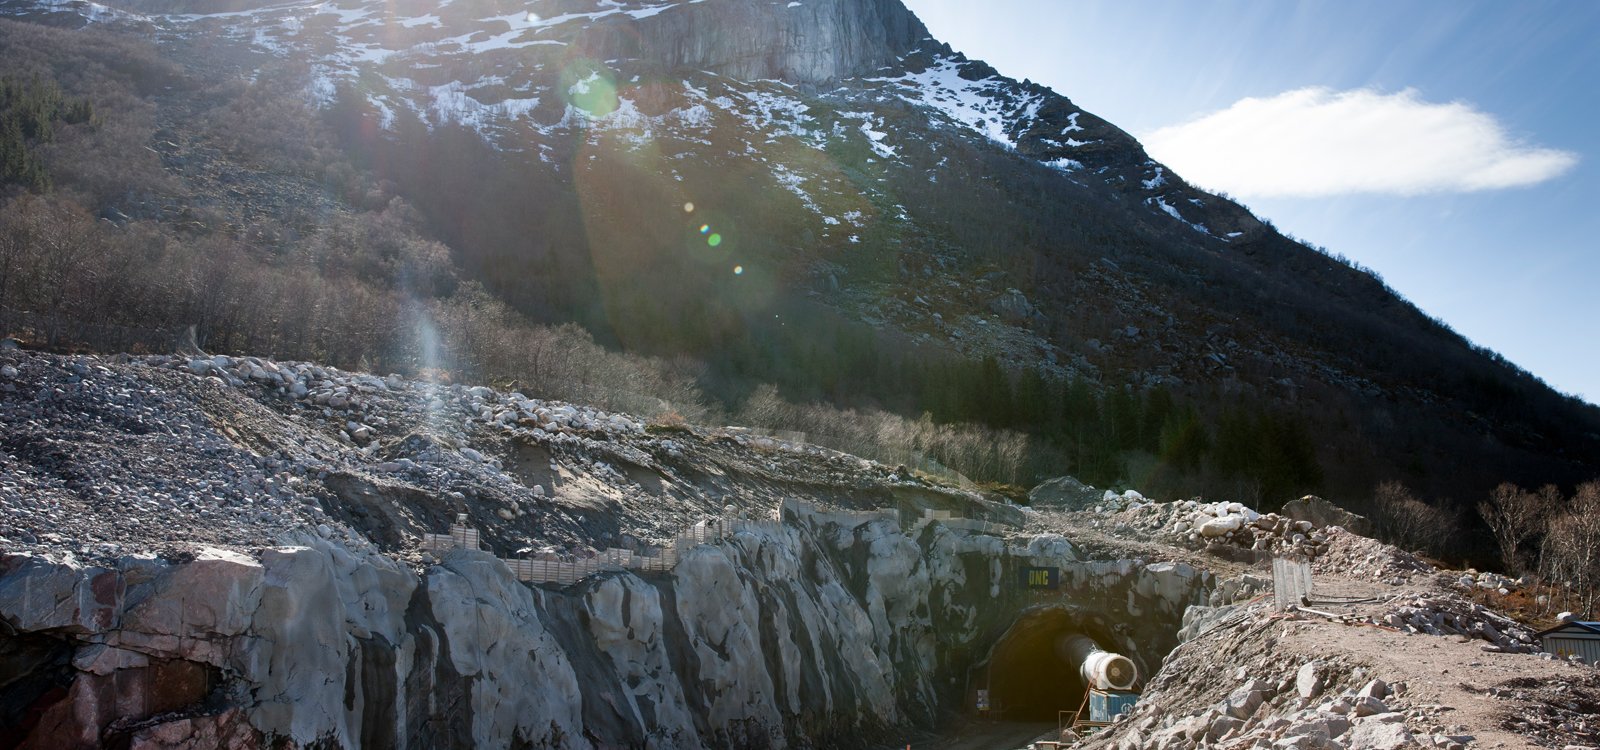 The tunnelling site near the Bratland community is tightly flanked by towering mountains and clear blue fjords.